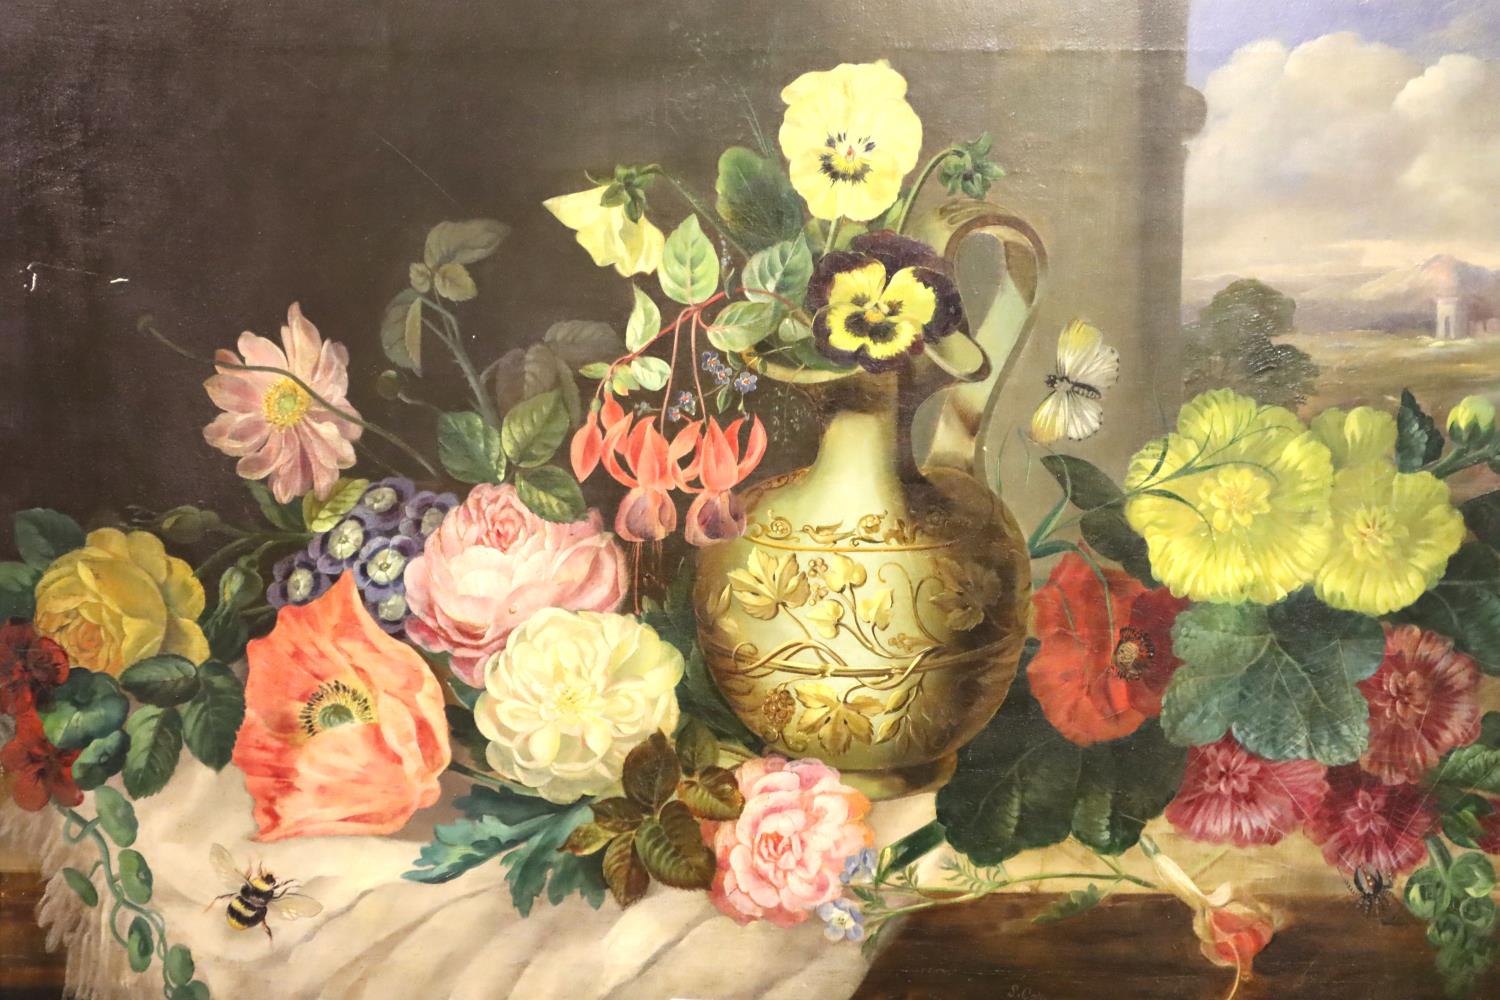 S COPE (19th century) oil on canvas, a still life scene with insects among floral arrangement, dated